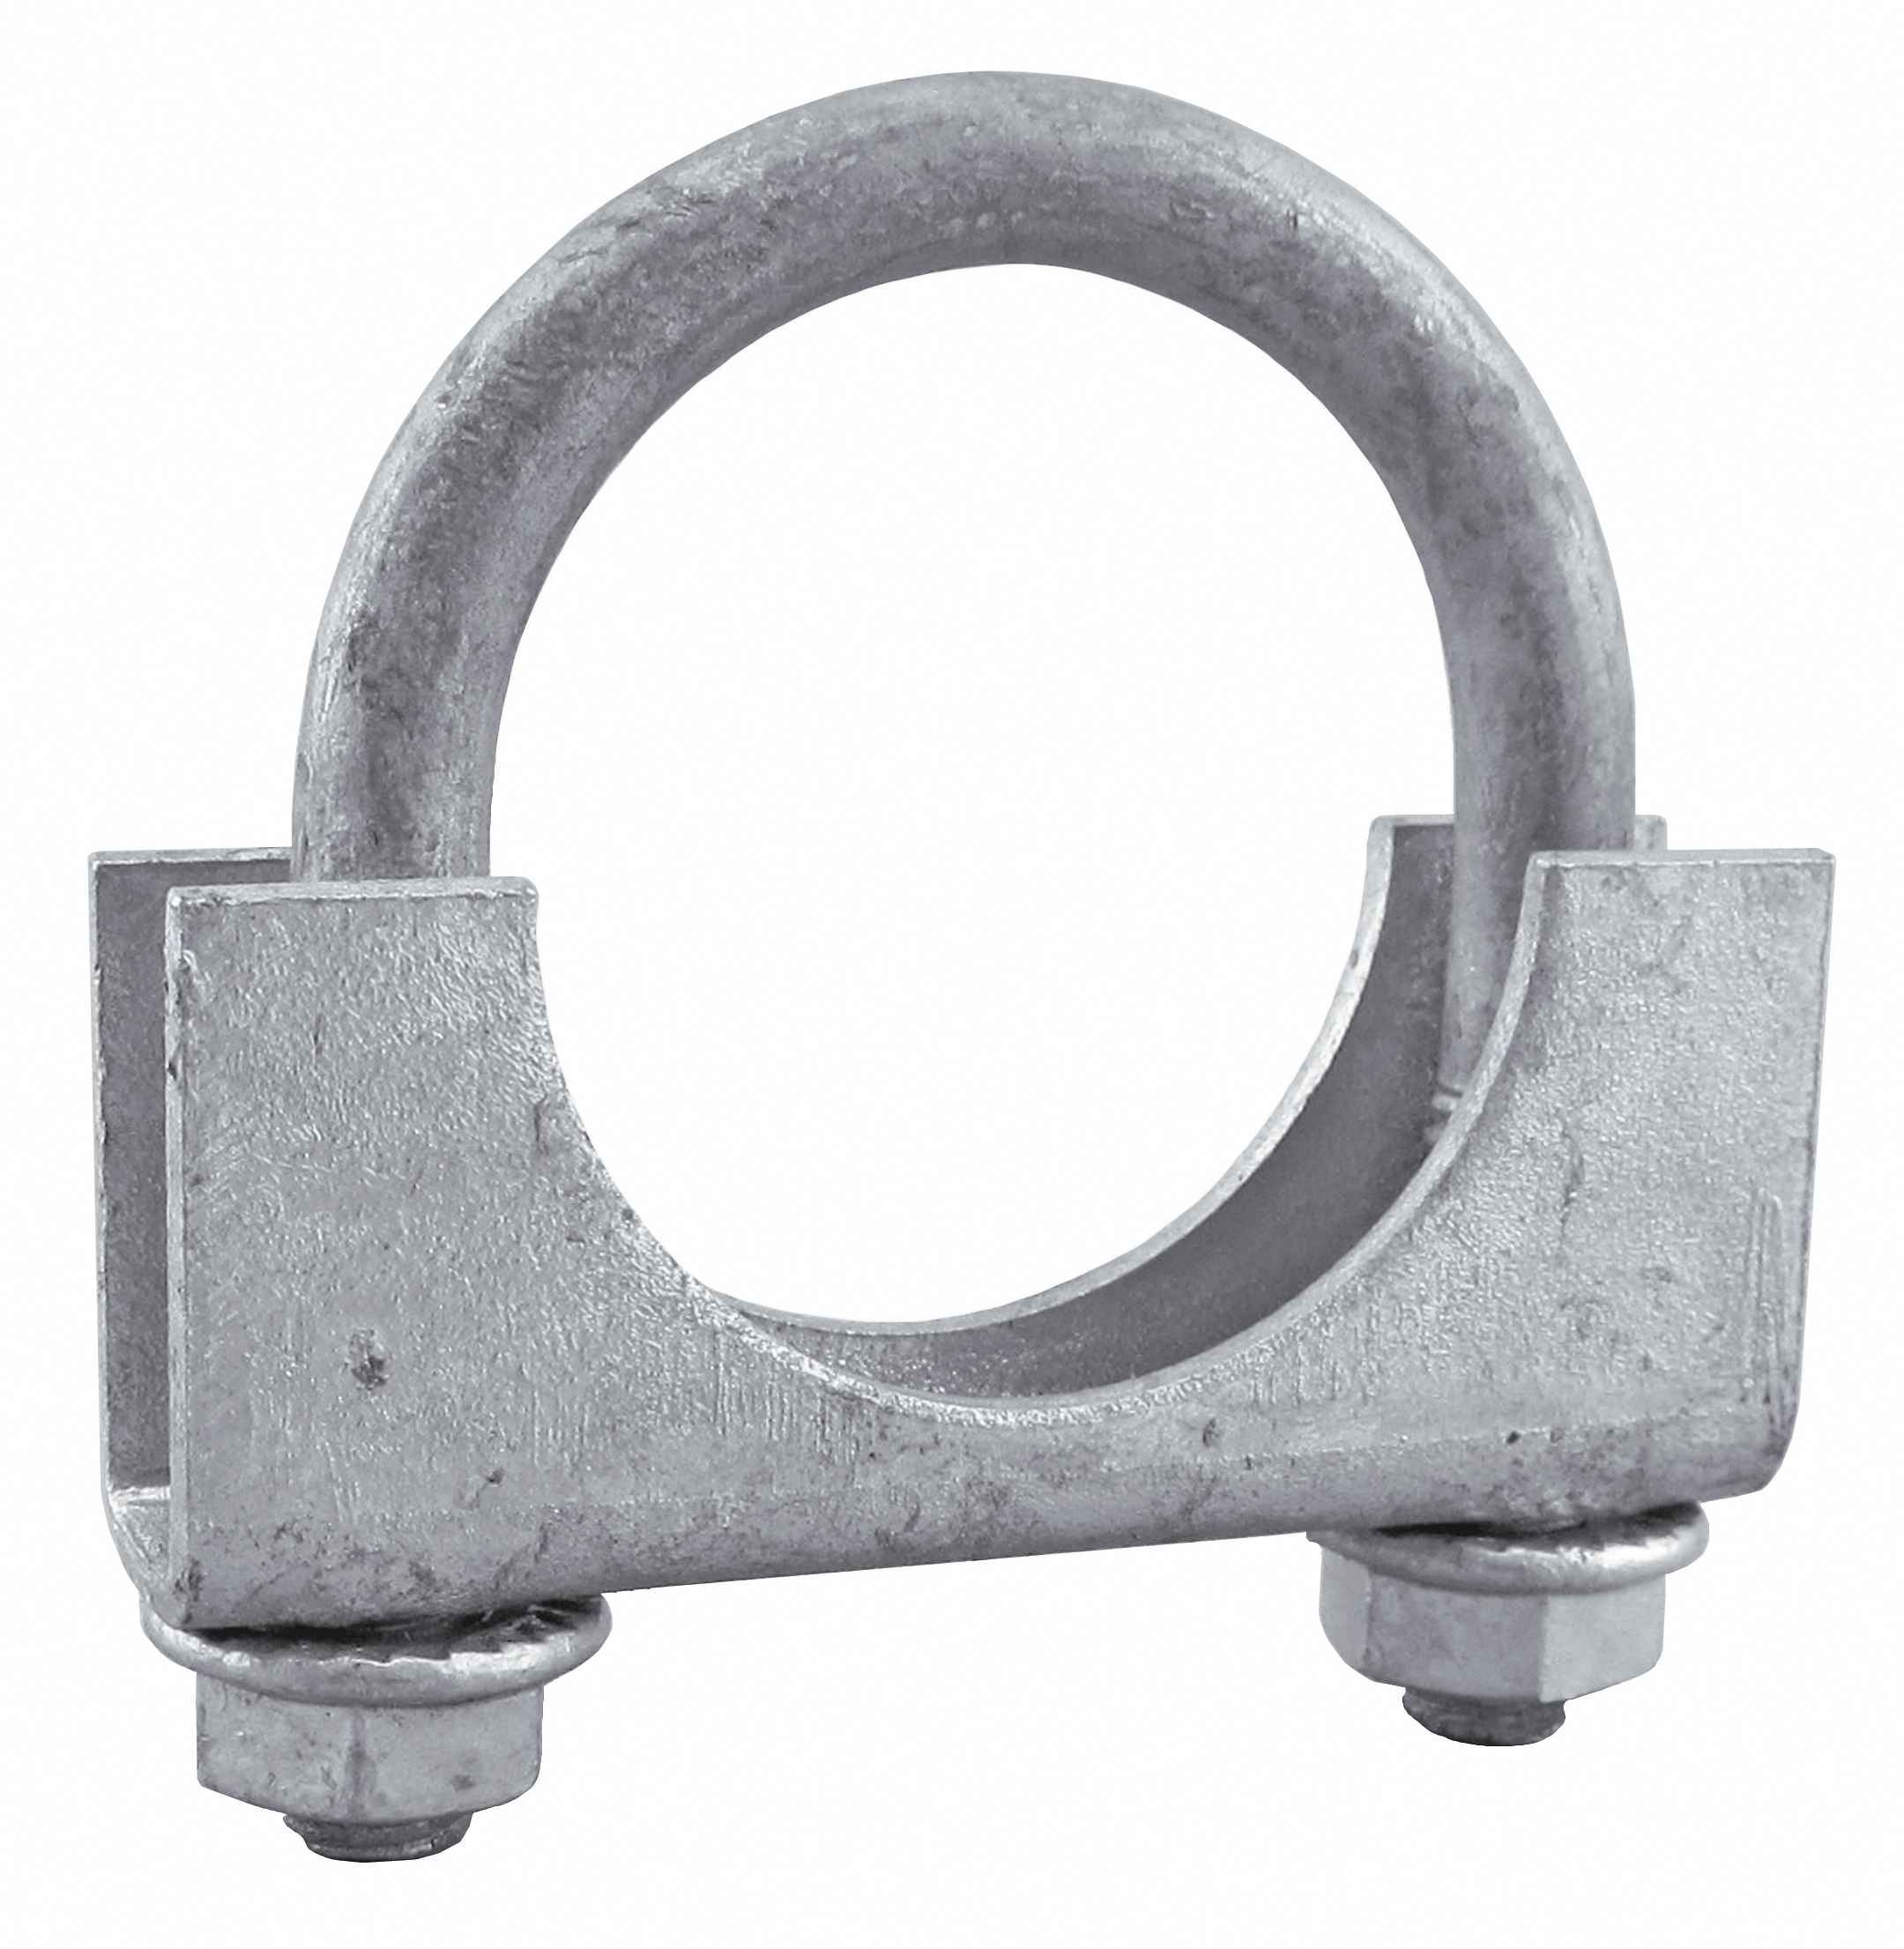 Cycle 24 Galvanized Economy Saddle Clamp for 1.5 Inch Tubing